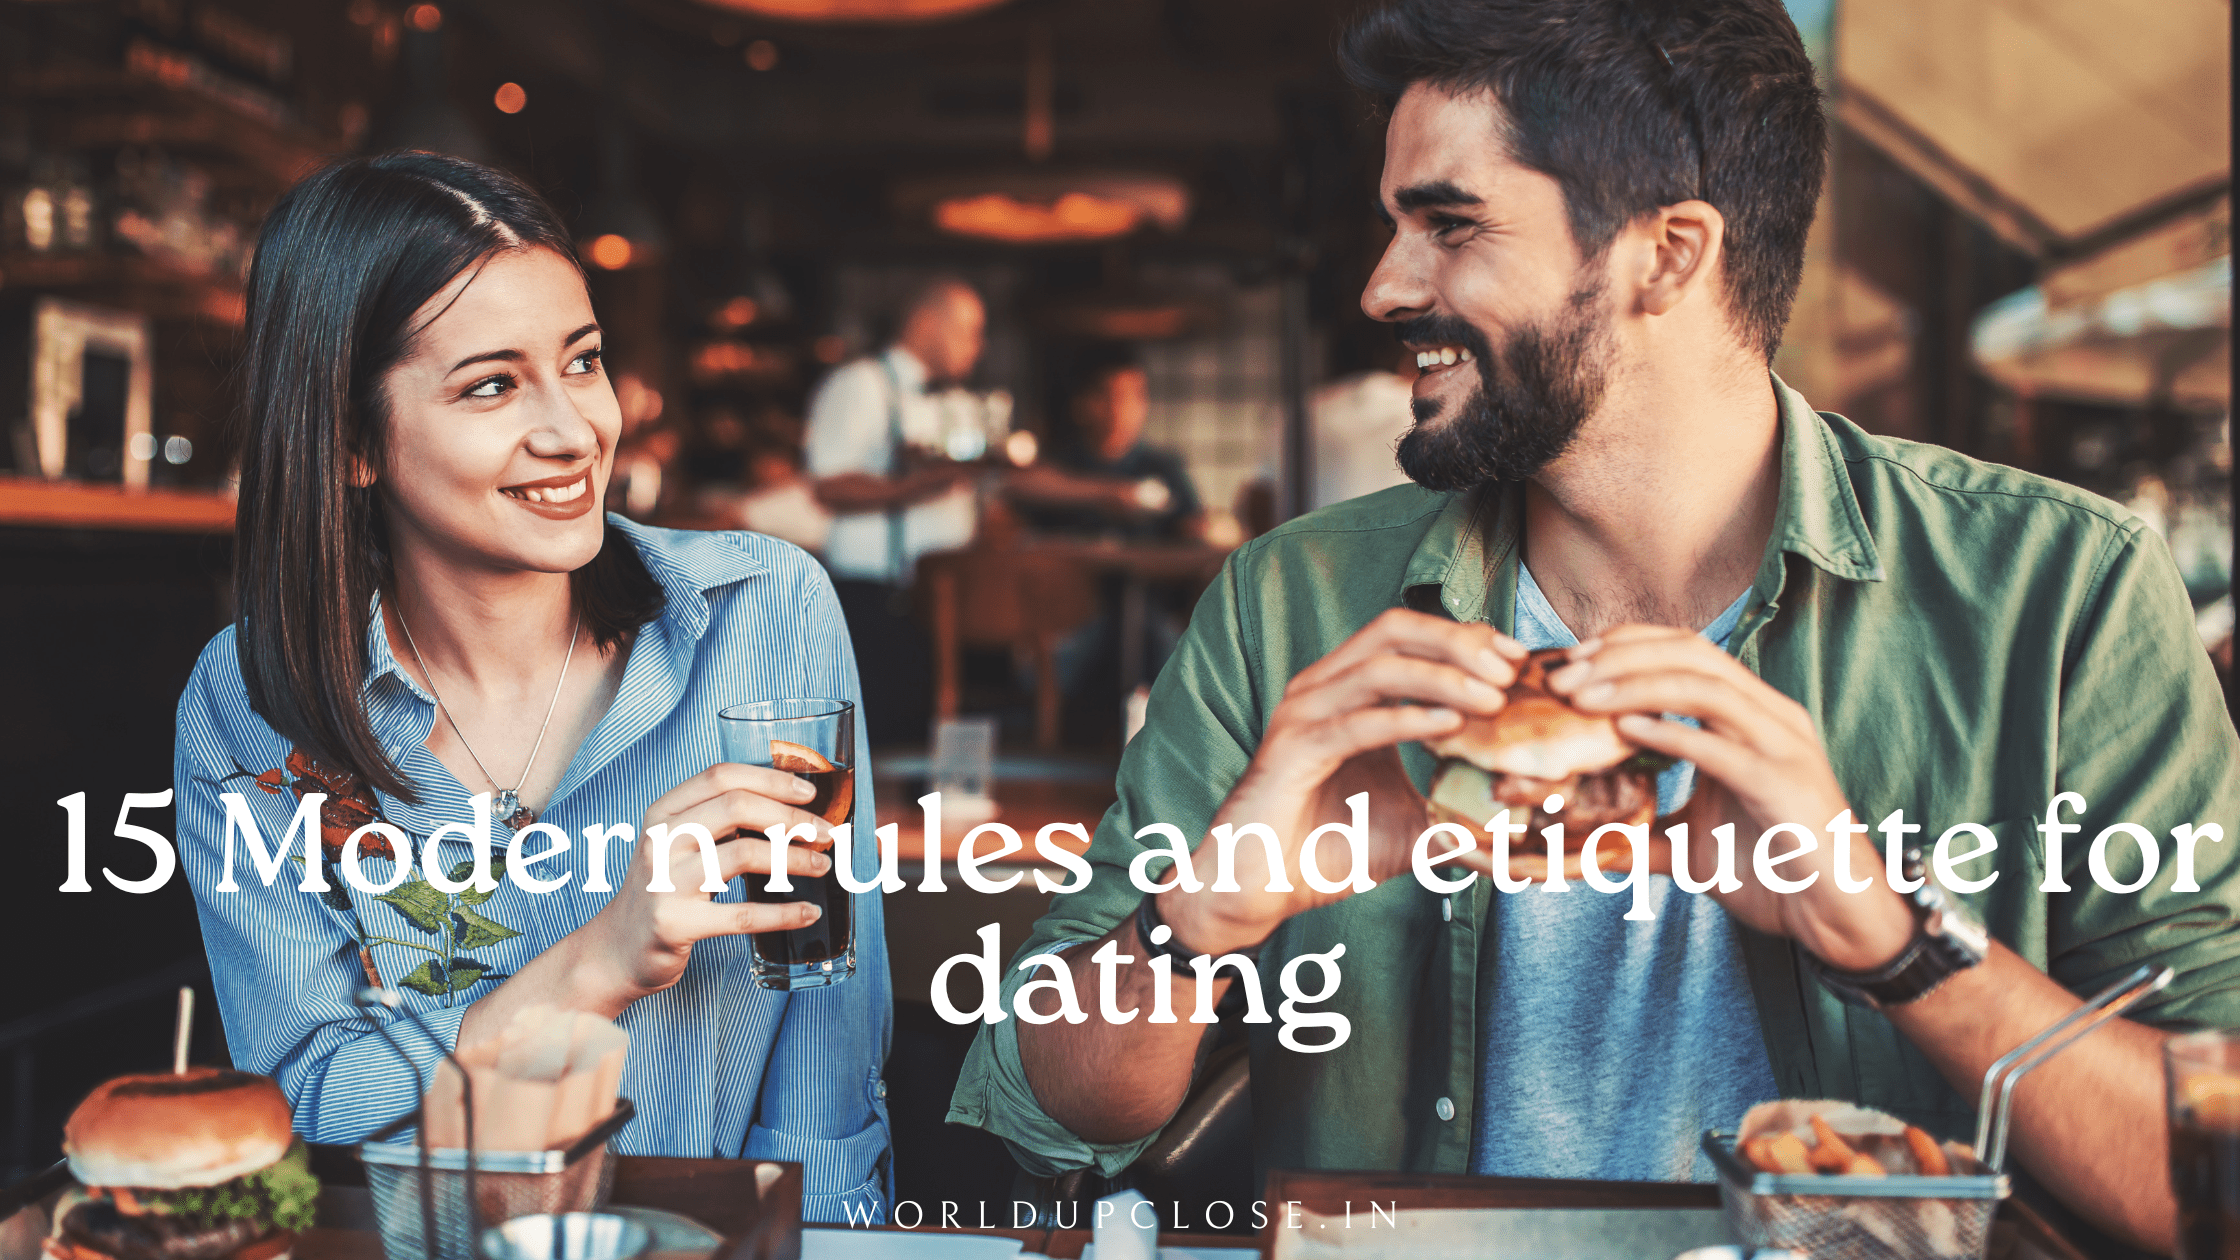 15 Modern rules and etiquette for dating 2